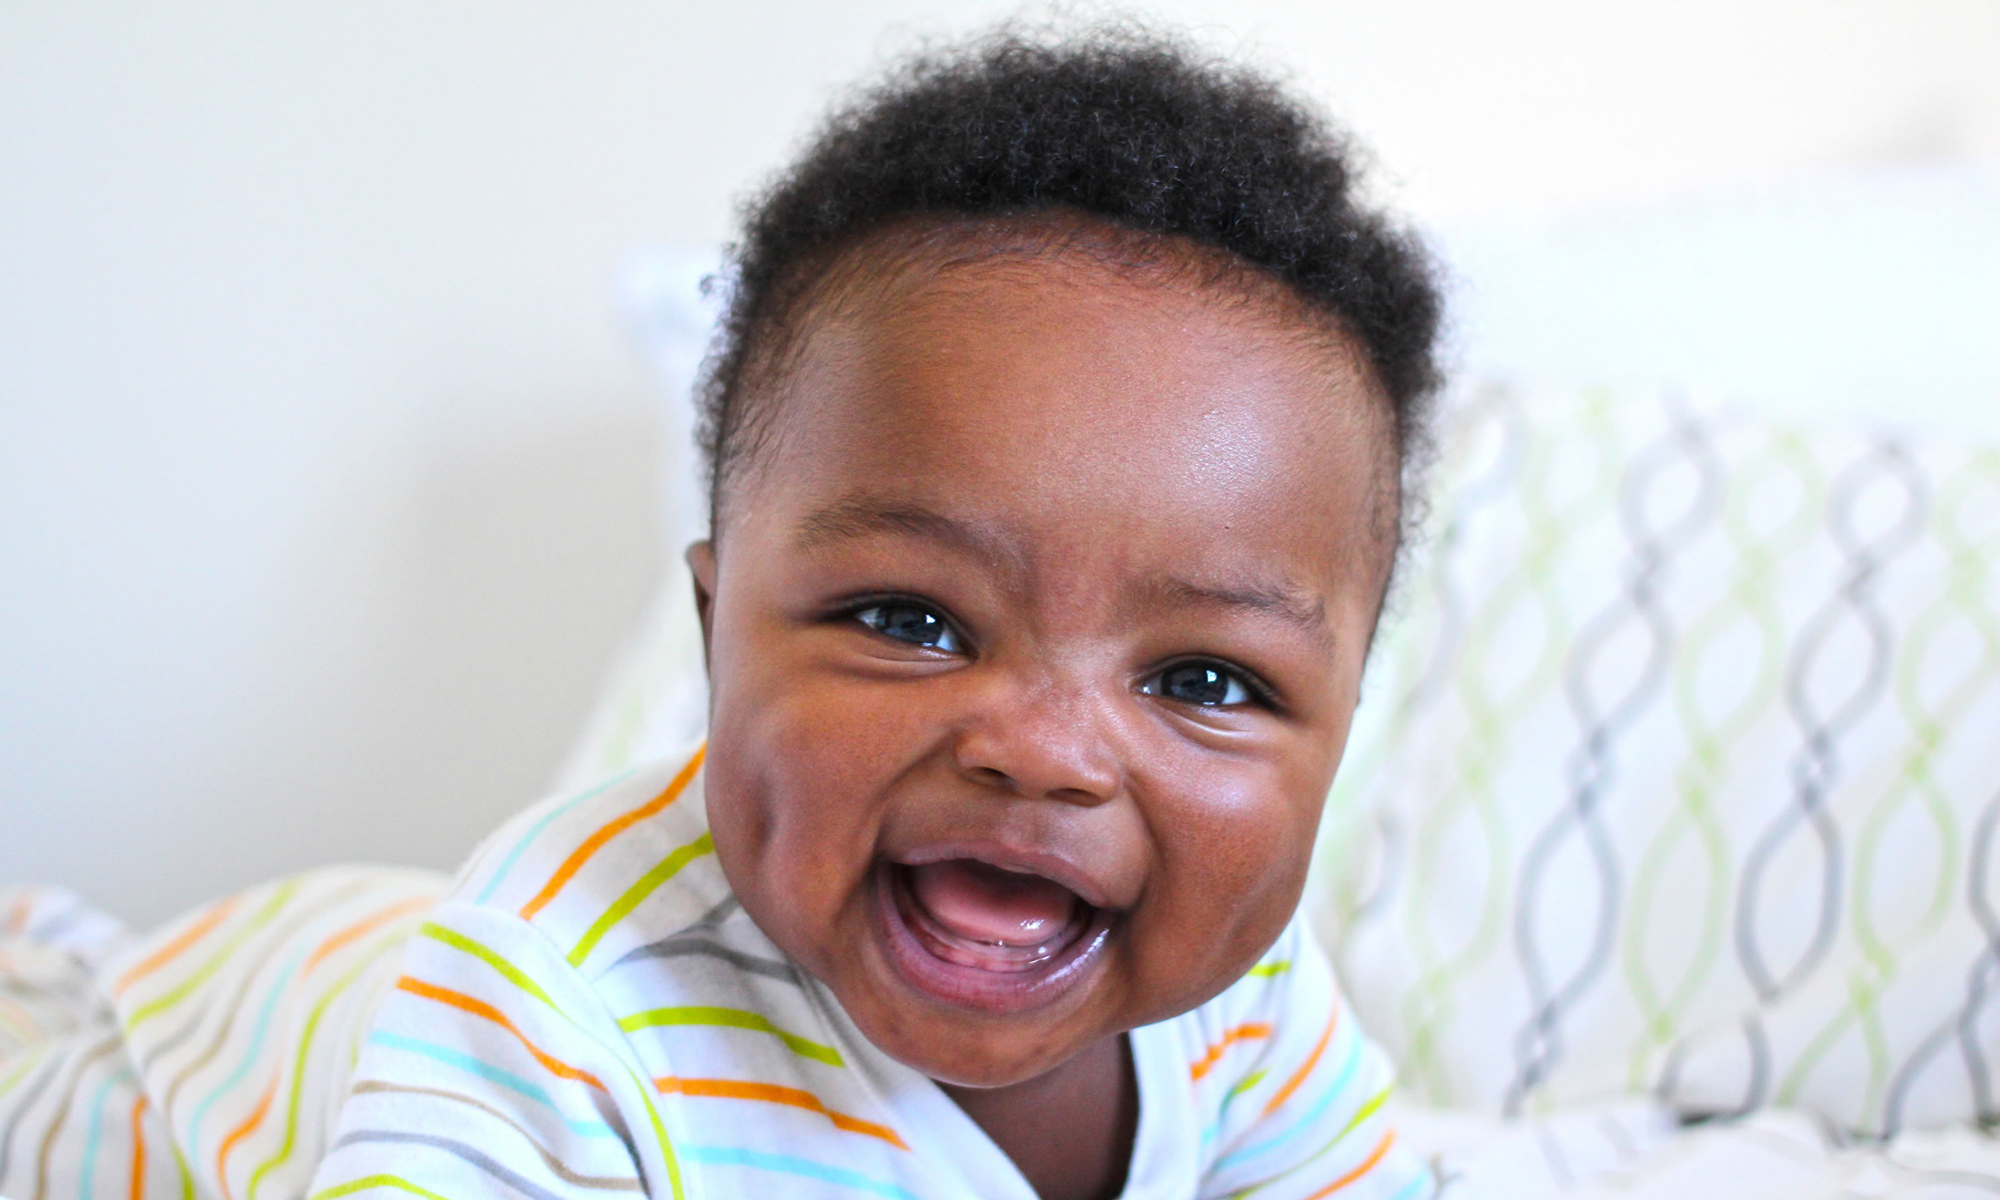 Meet a scientist with a most delightful job: He studies baby laughter |